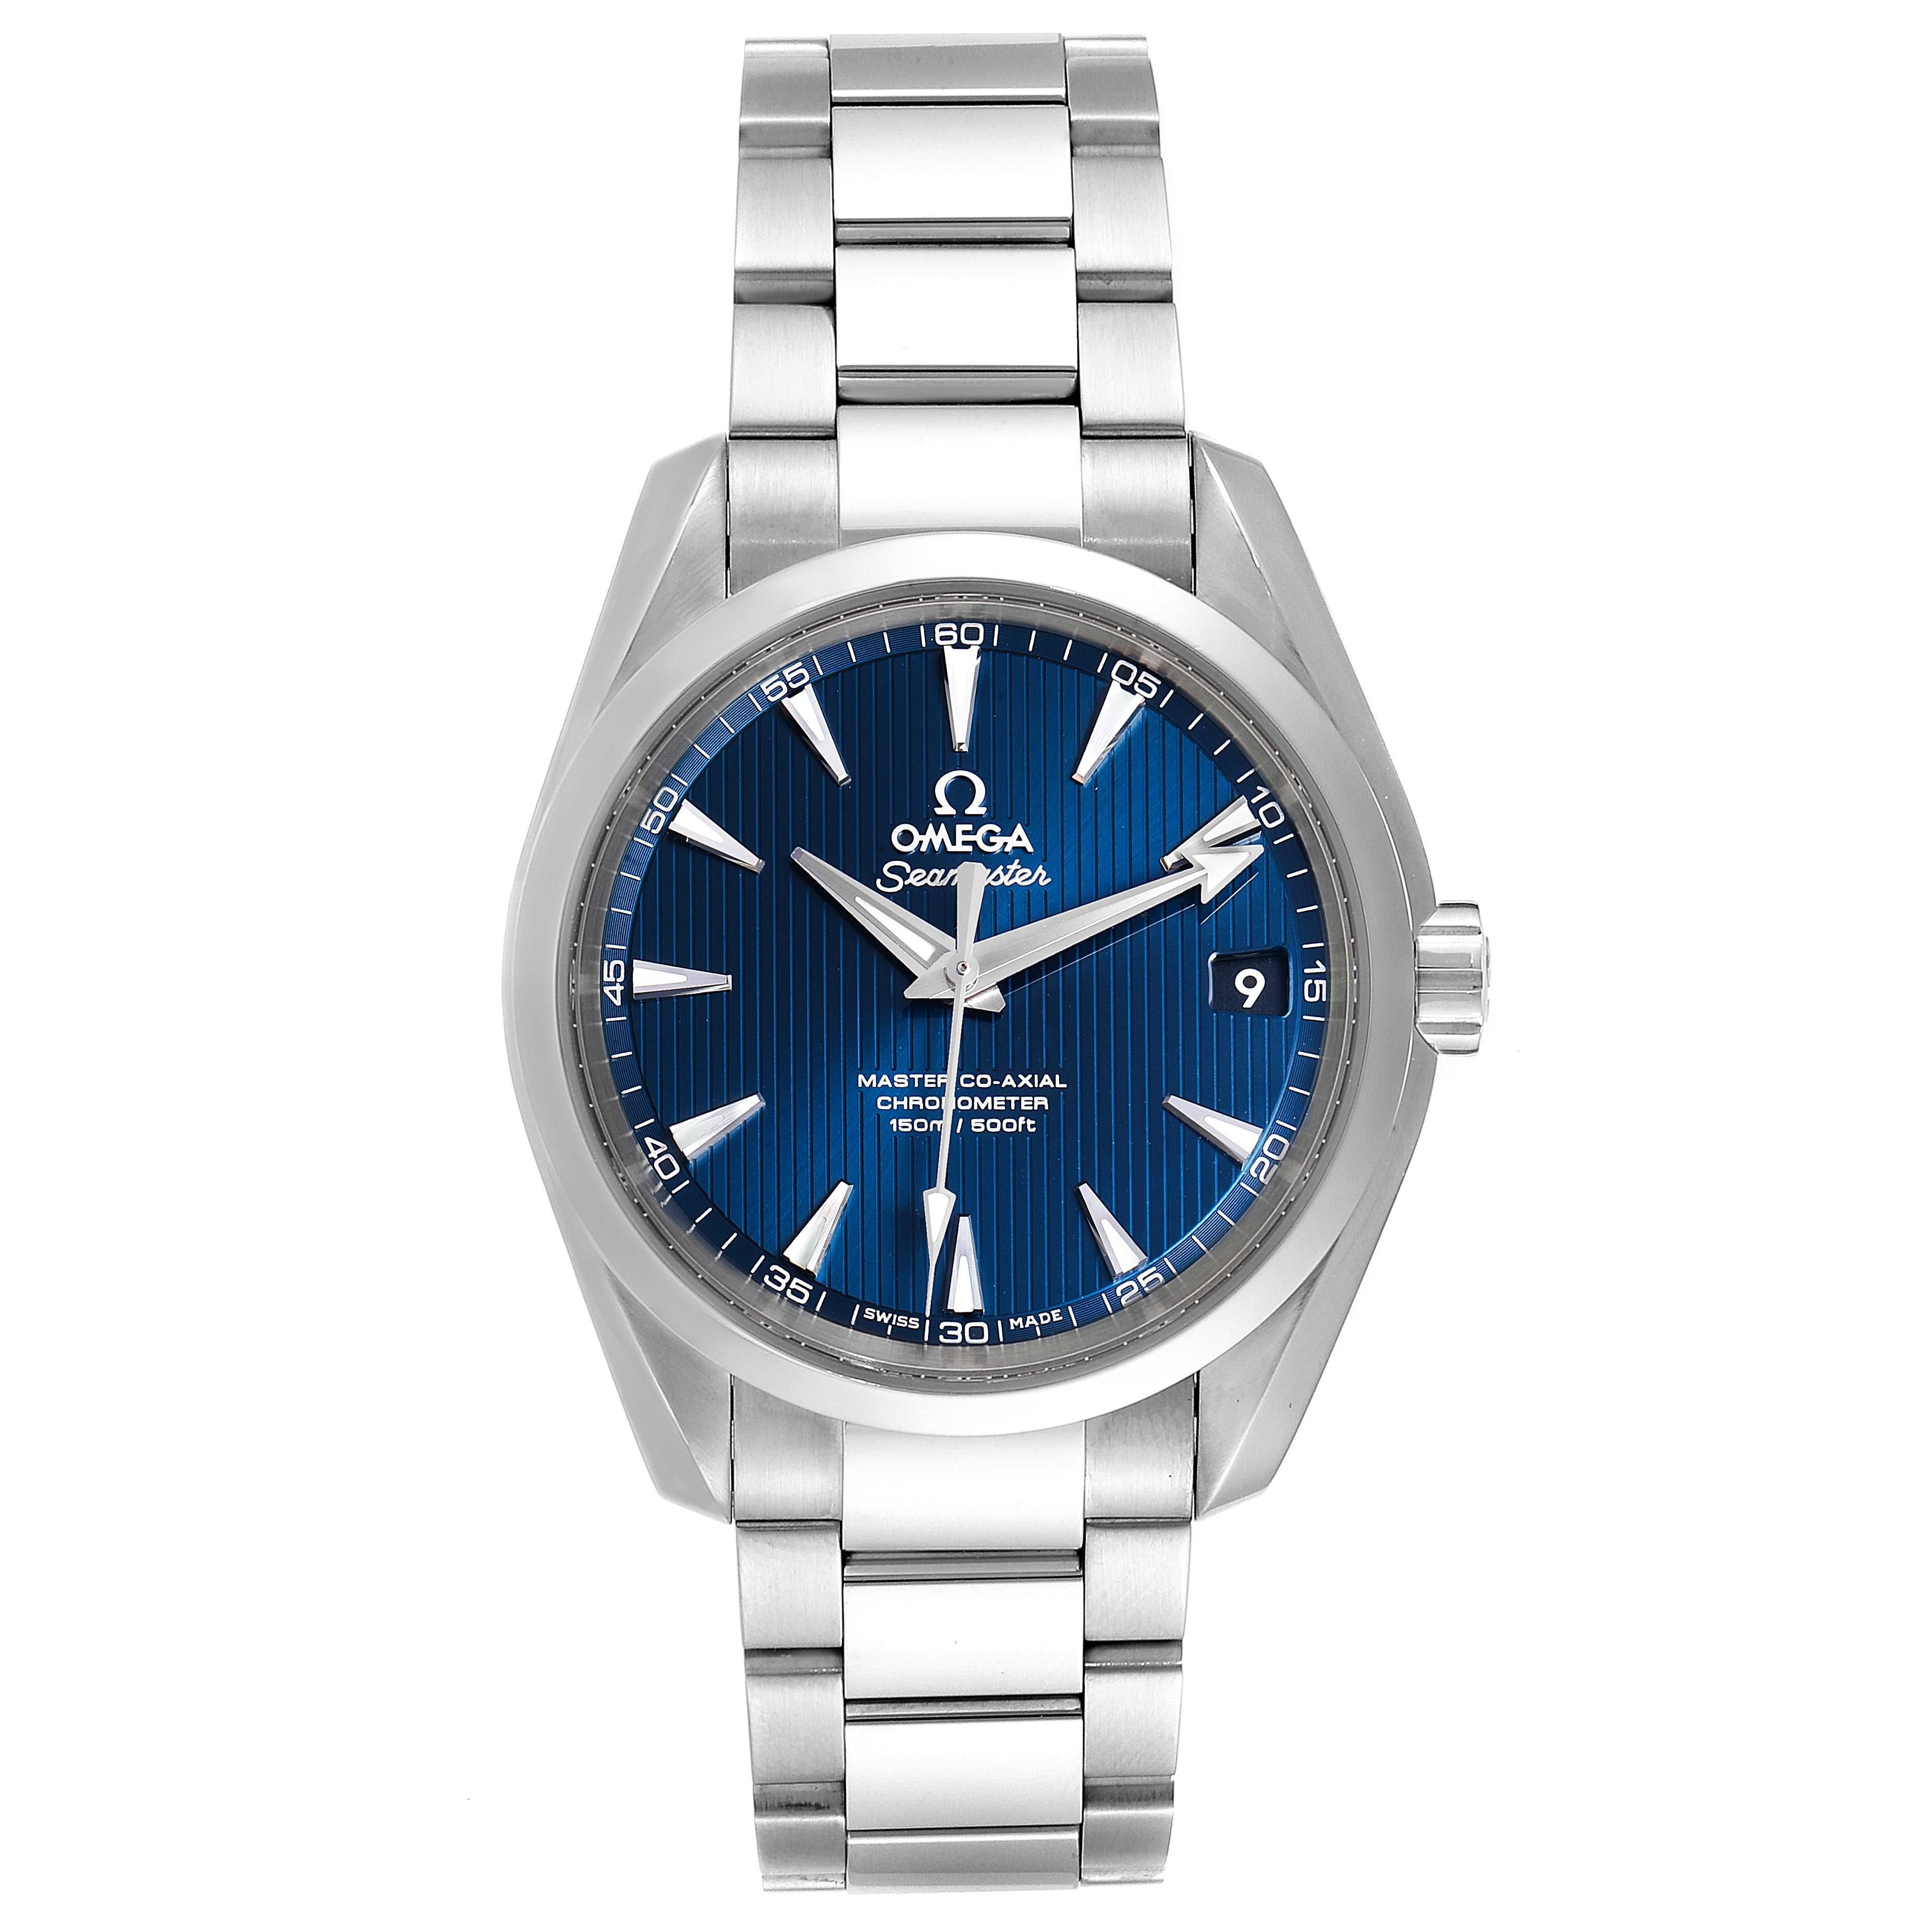 Omega Seamaster Aqua Terra Blue Dial Watch 231.10.39.21.03.002 Box Card. Automatic self-winding movement. Stainless steel round case 38.5 mm in diameter. Transparent case back. Stainless steel smooth bezel. Scratch resistant sapphire crystal. Blue